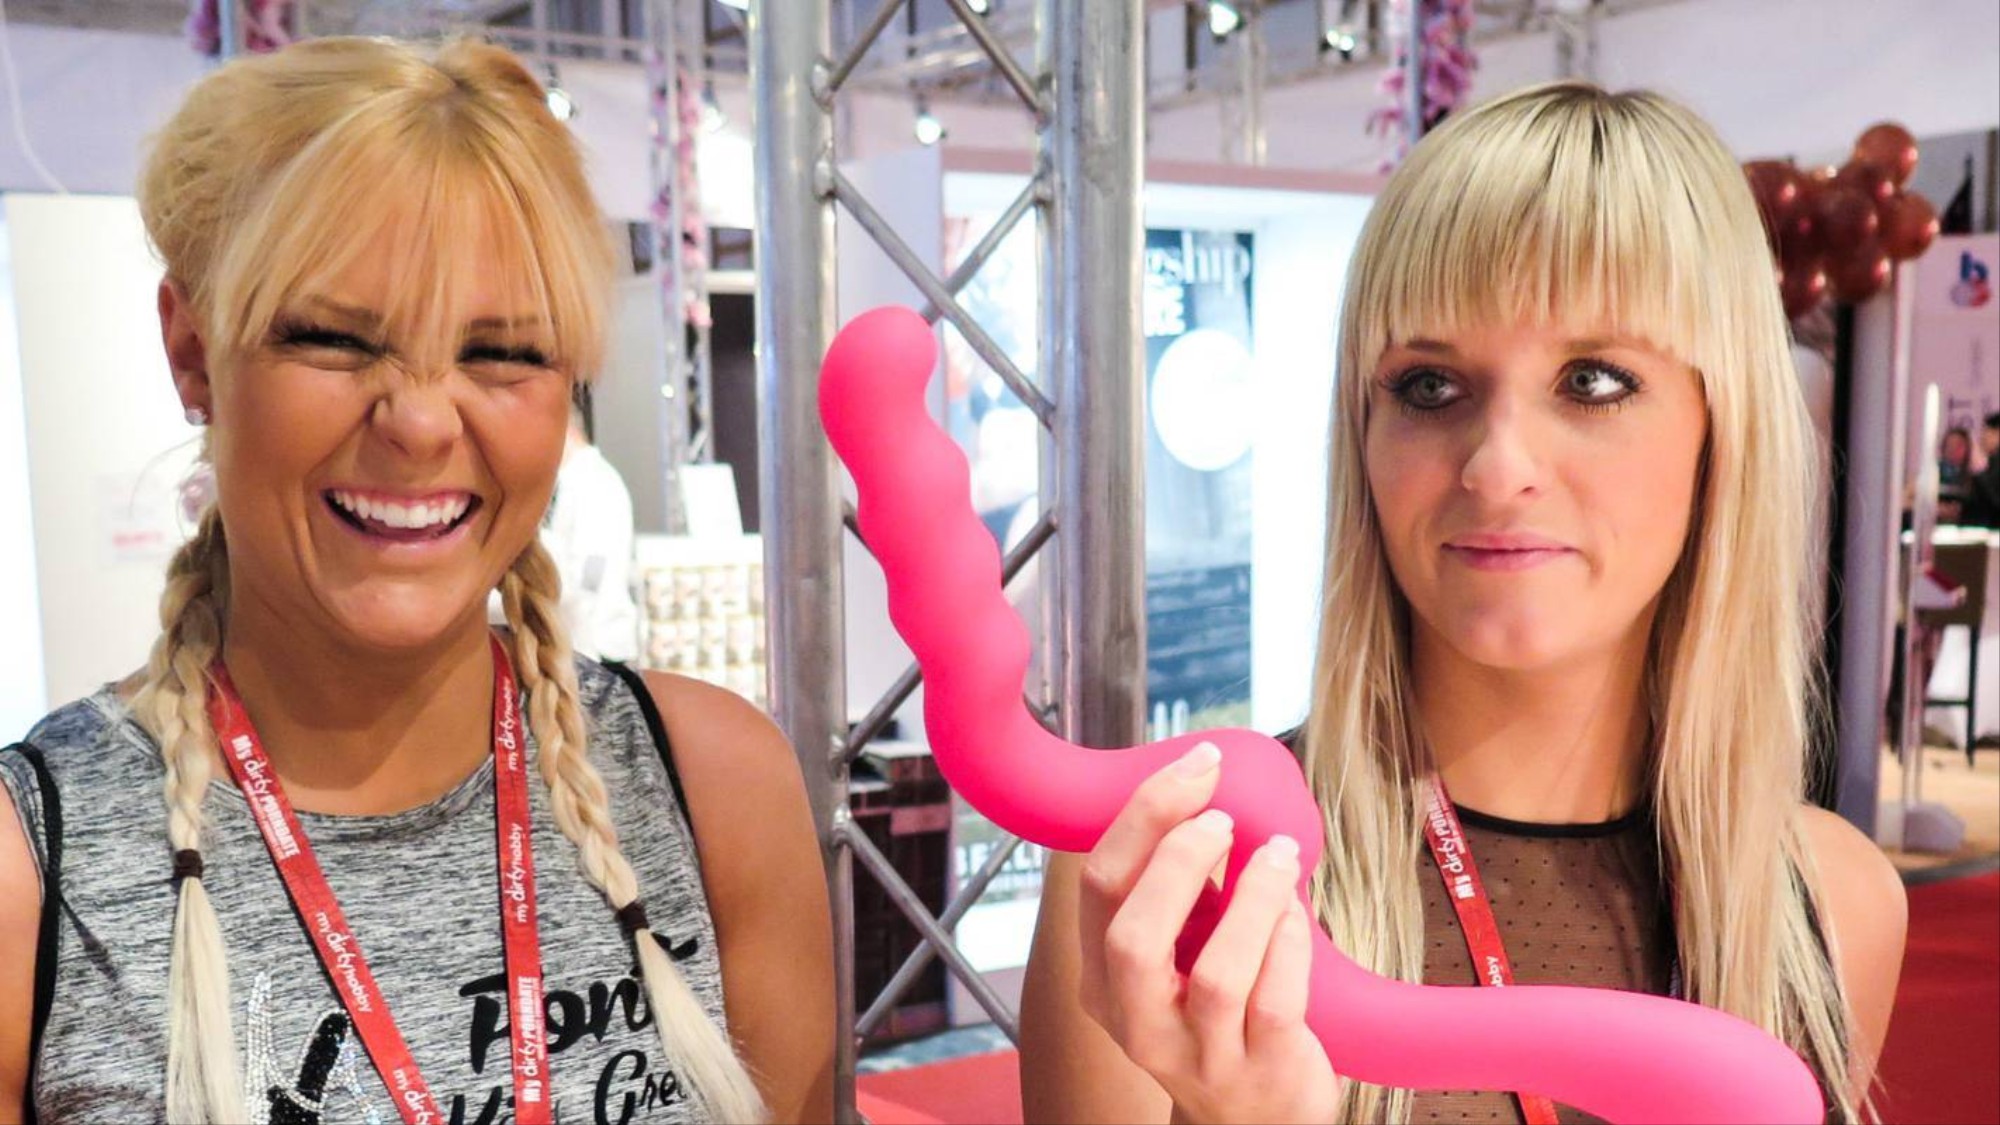 Porn Stars Of Germany - We Went to Germany's Largest Sex Convention with Two Beloved ...